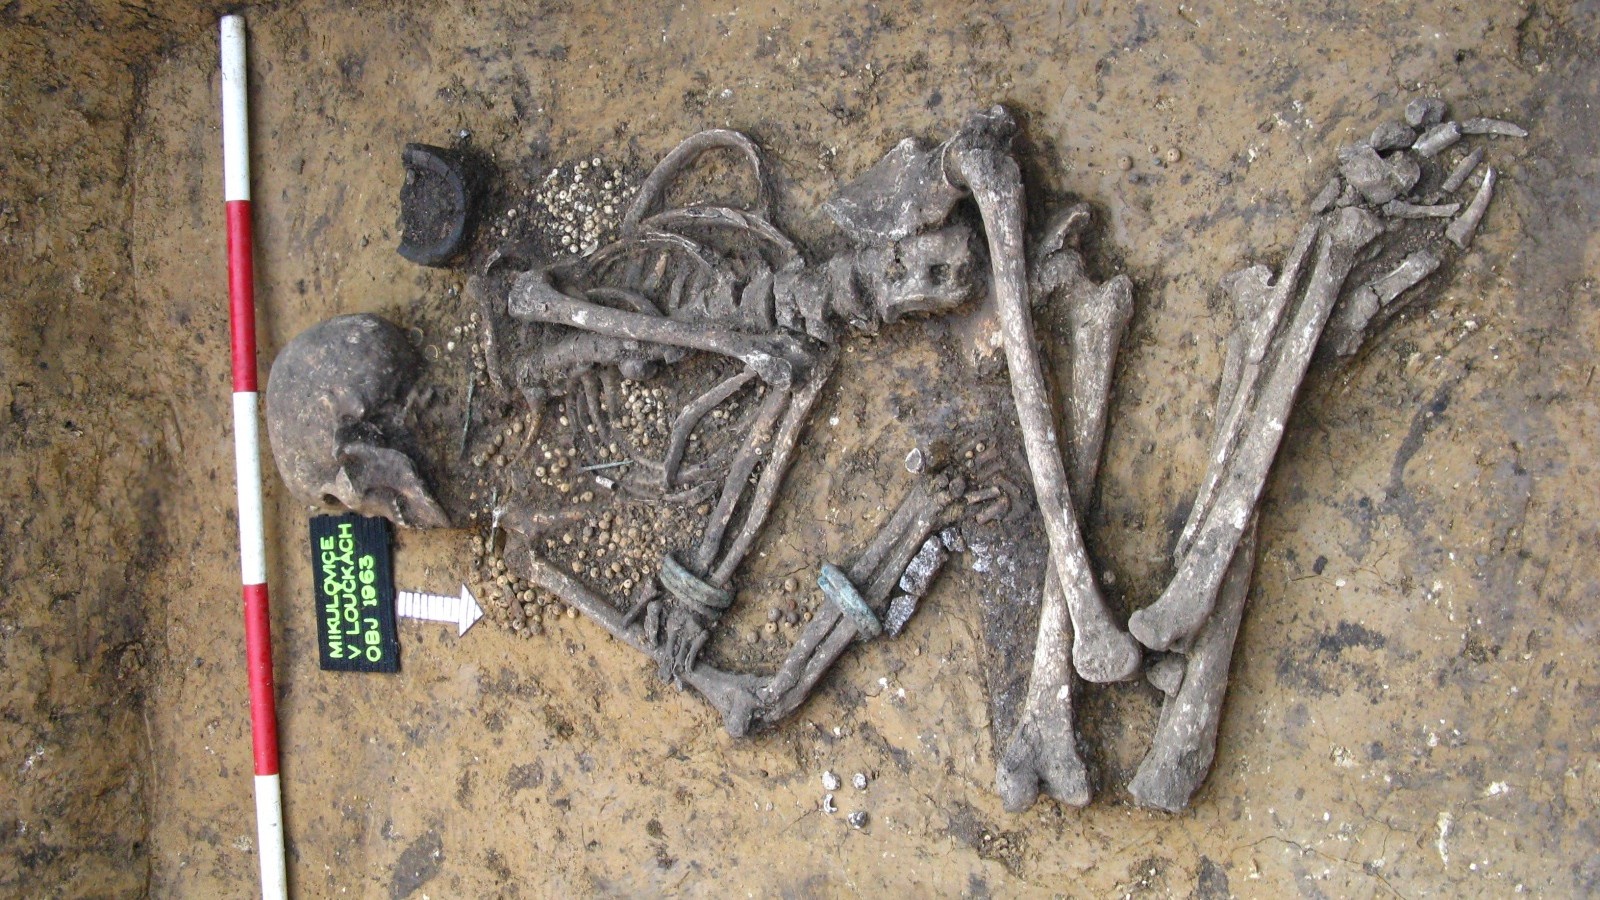 Skeleton of woman from Bronze-Age Bohemia discovered in Mikulovice near Pardubice, Czech Republic.